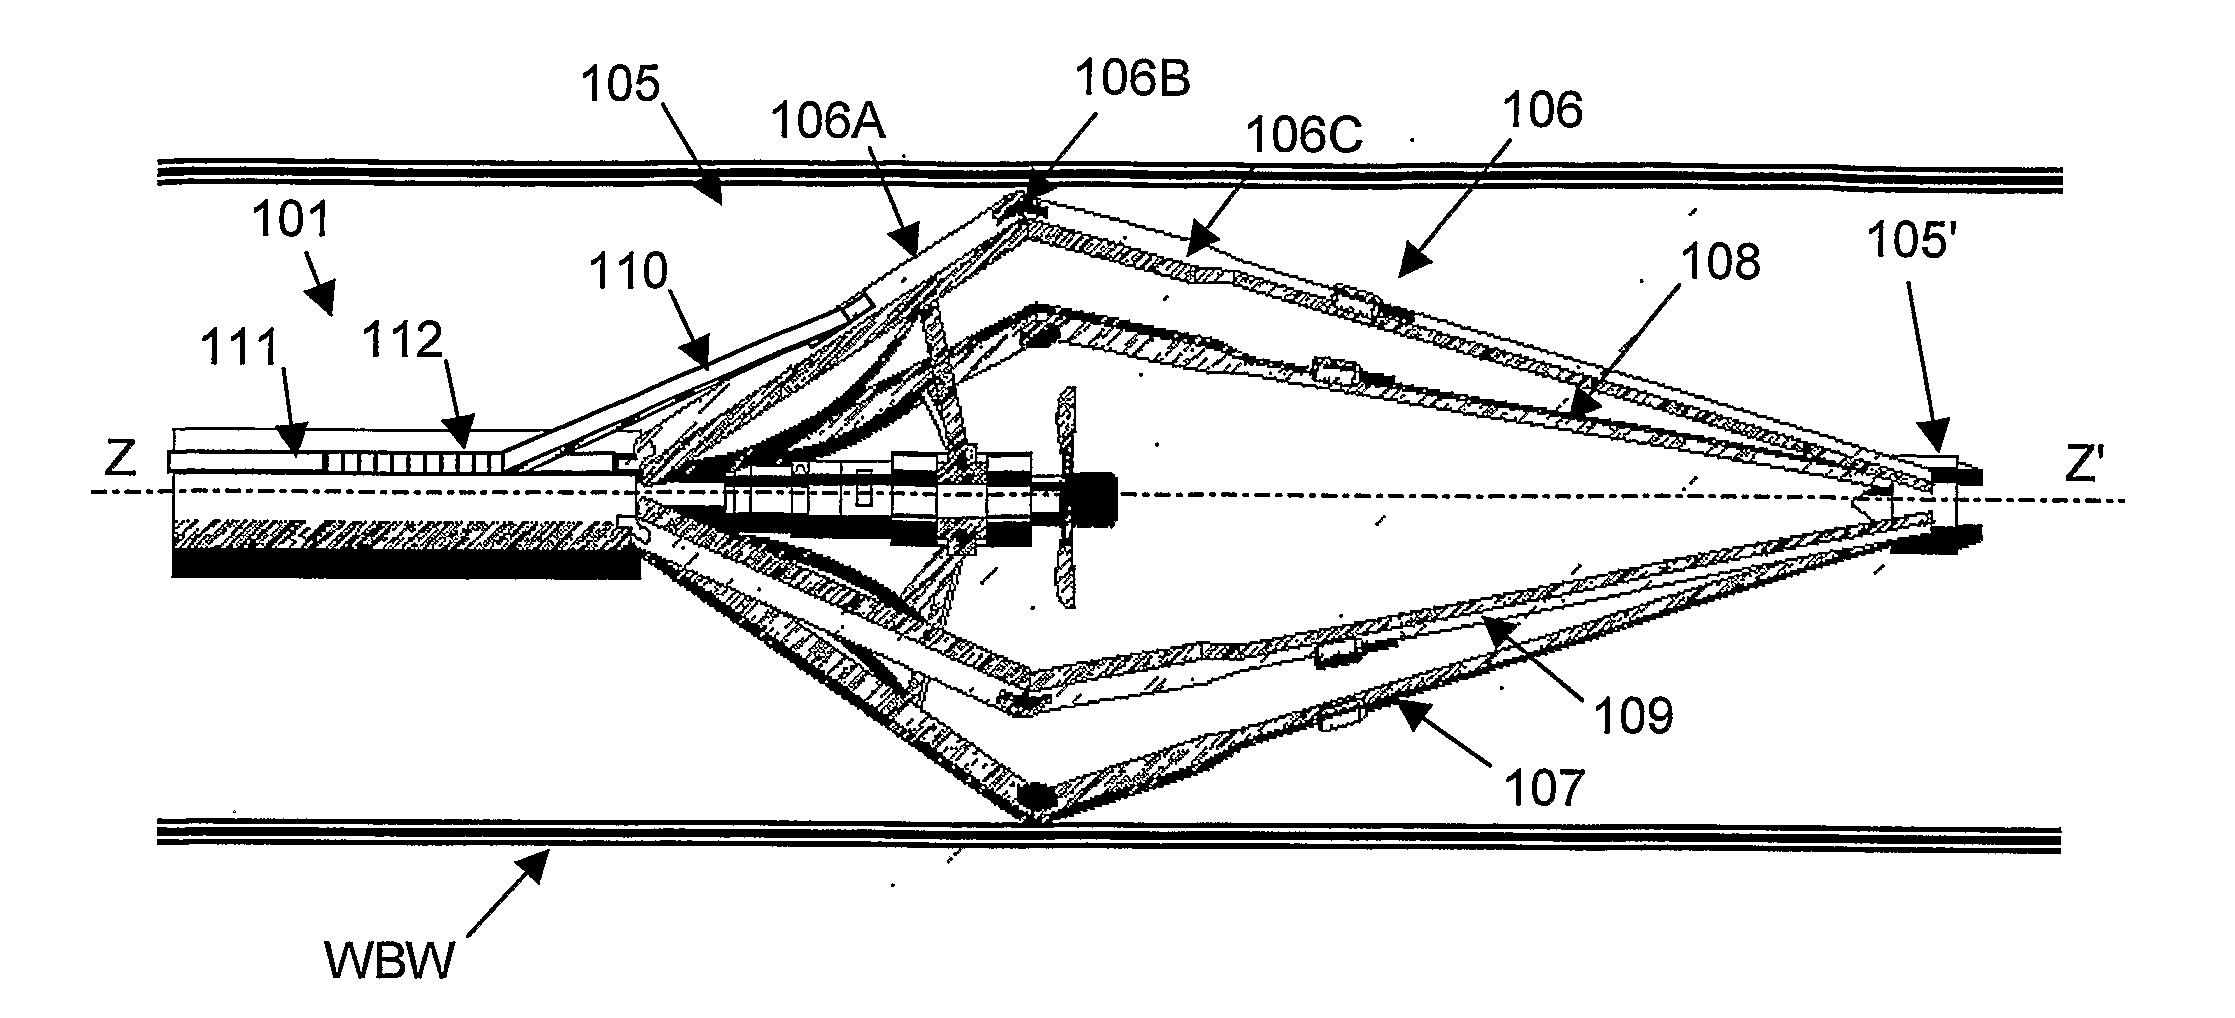 Apparatus for Measuring an Internal Dimension of a Well Bore